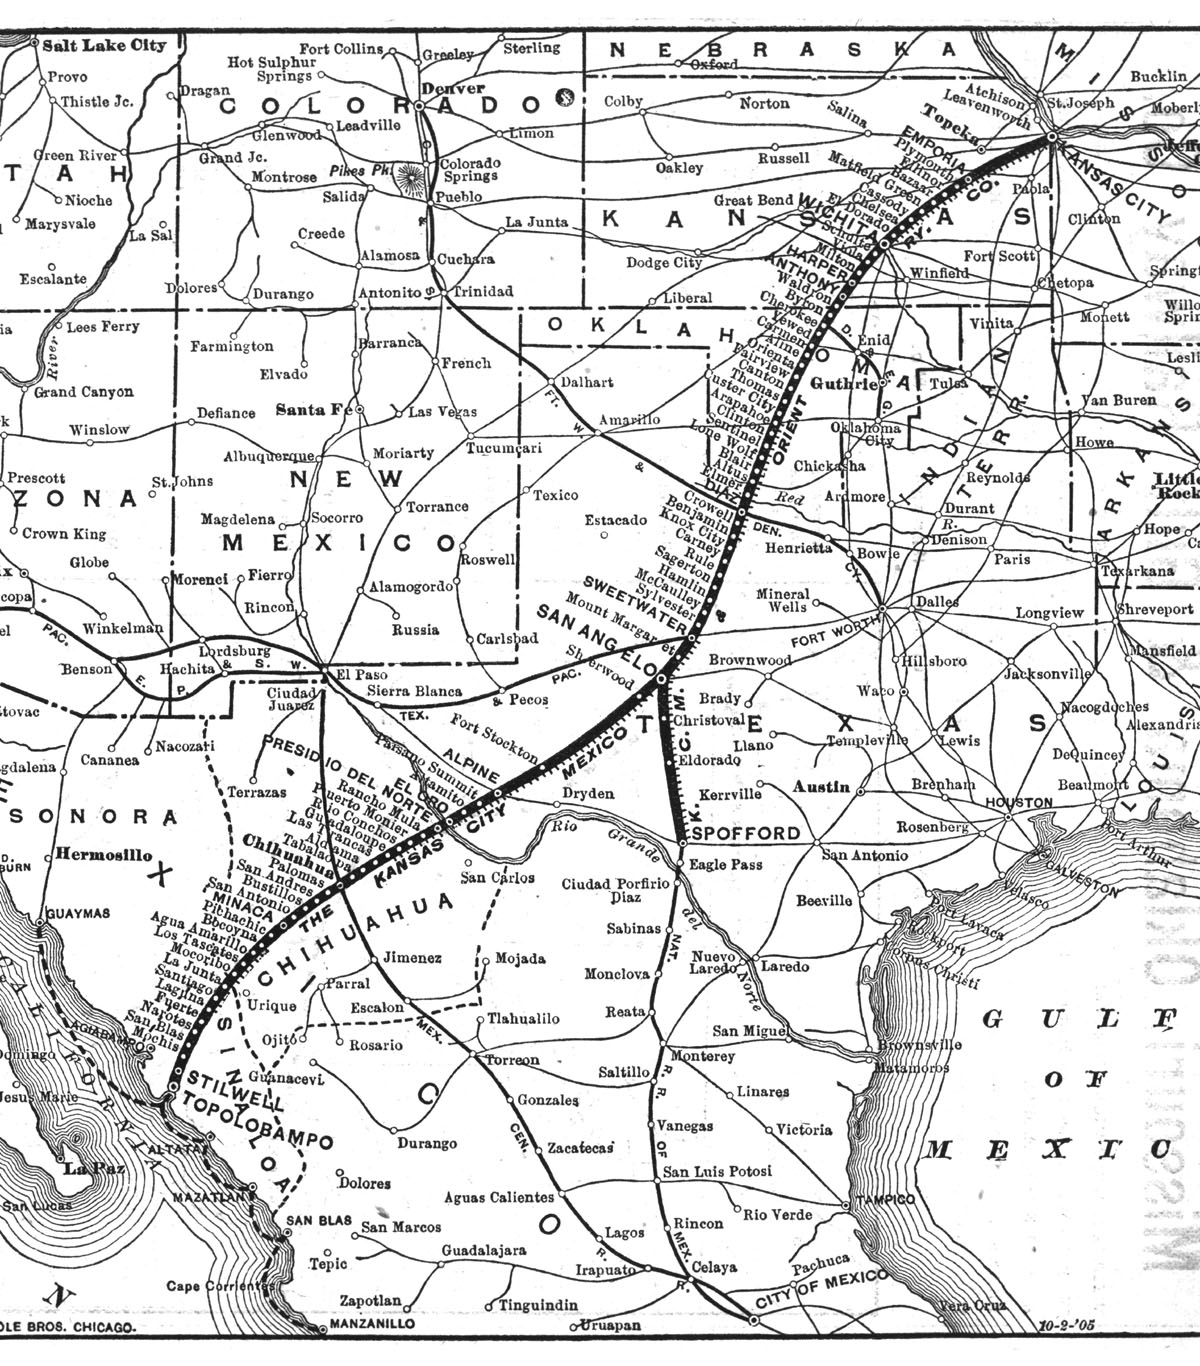 Kansas City, Mexico & Orient Railway Company (Kans., Okla., Tex., Mex.), Public Timetable and Map Showing Route in 1906.